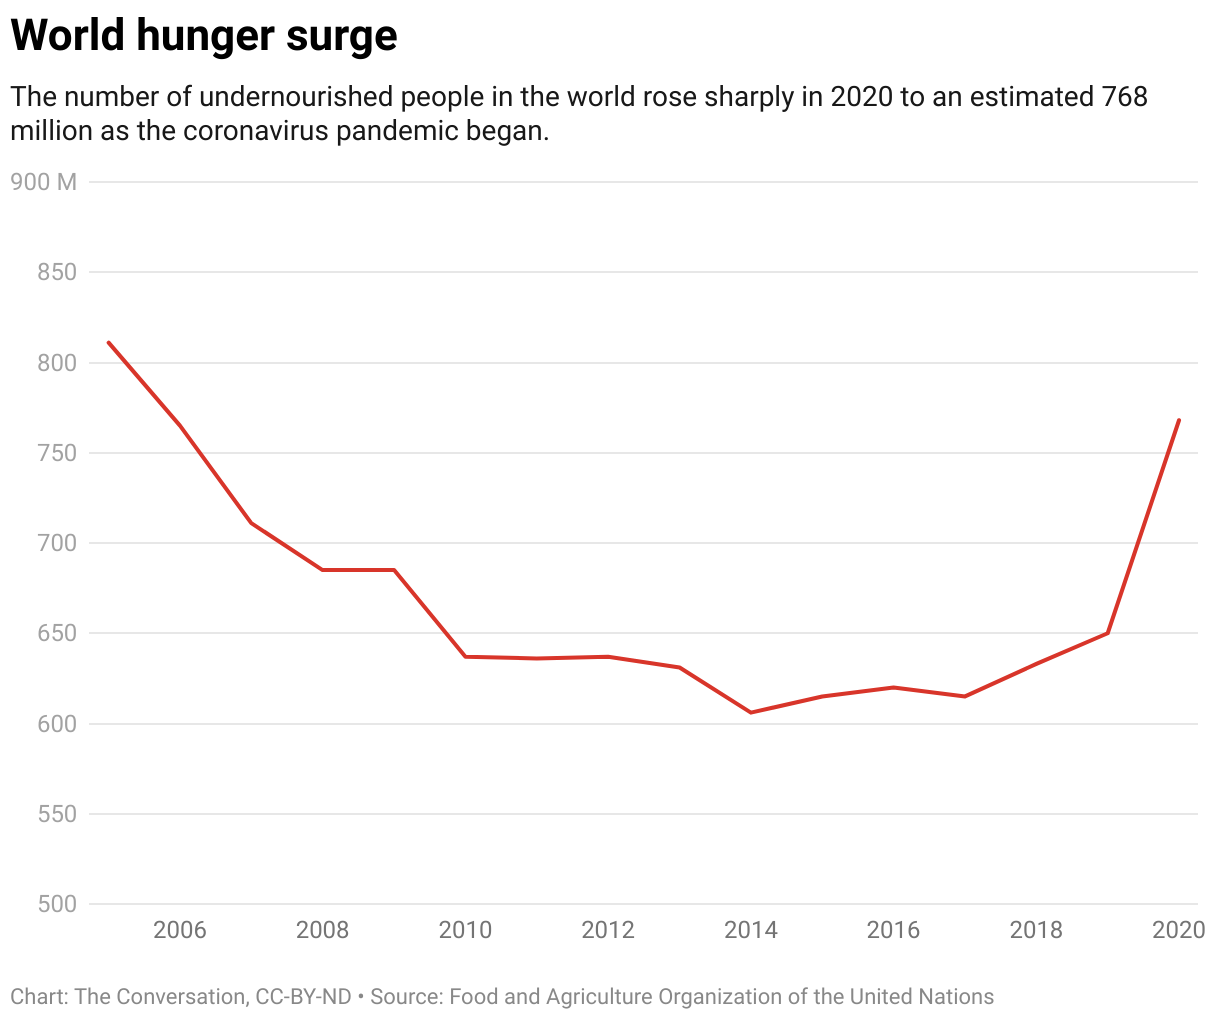 Graph showing the number of undernourished people in the world from 2000 to 2020 with an alarming spike since 2019